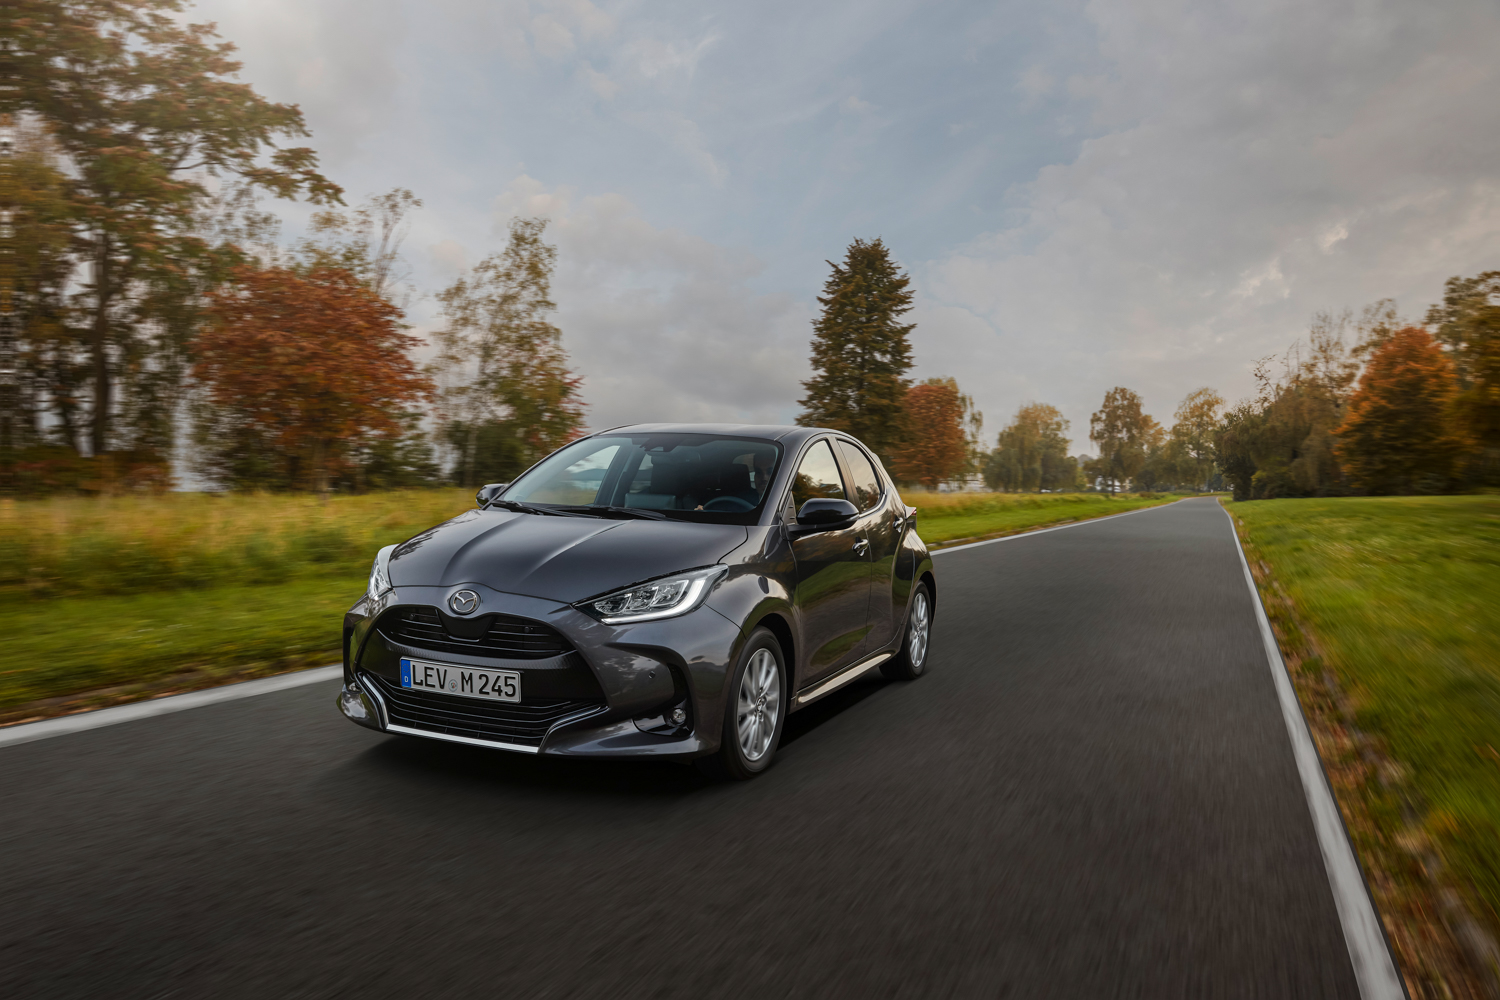 Car News | New Mazda2 hybrid launched | CompleteCar.ie